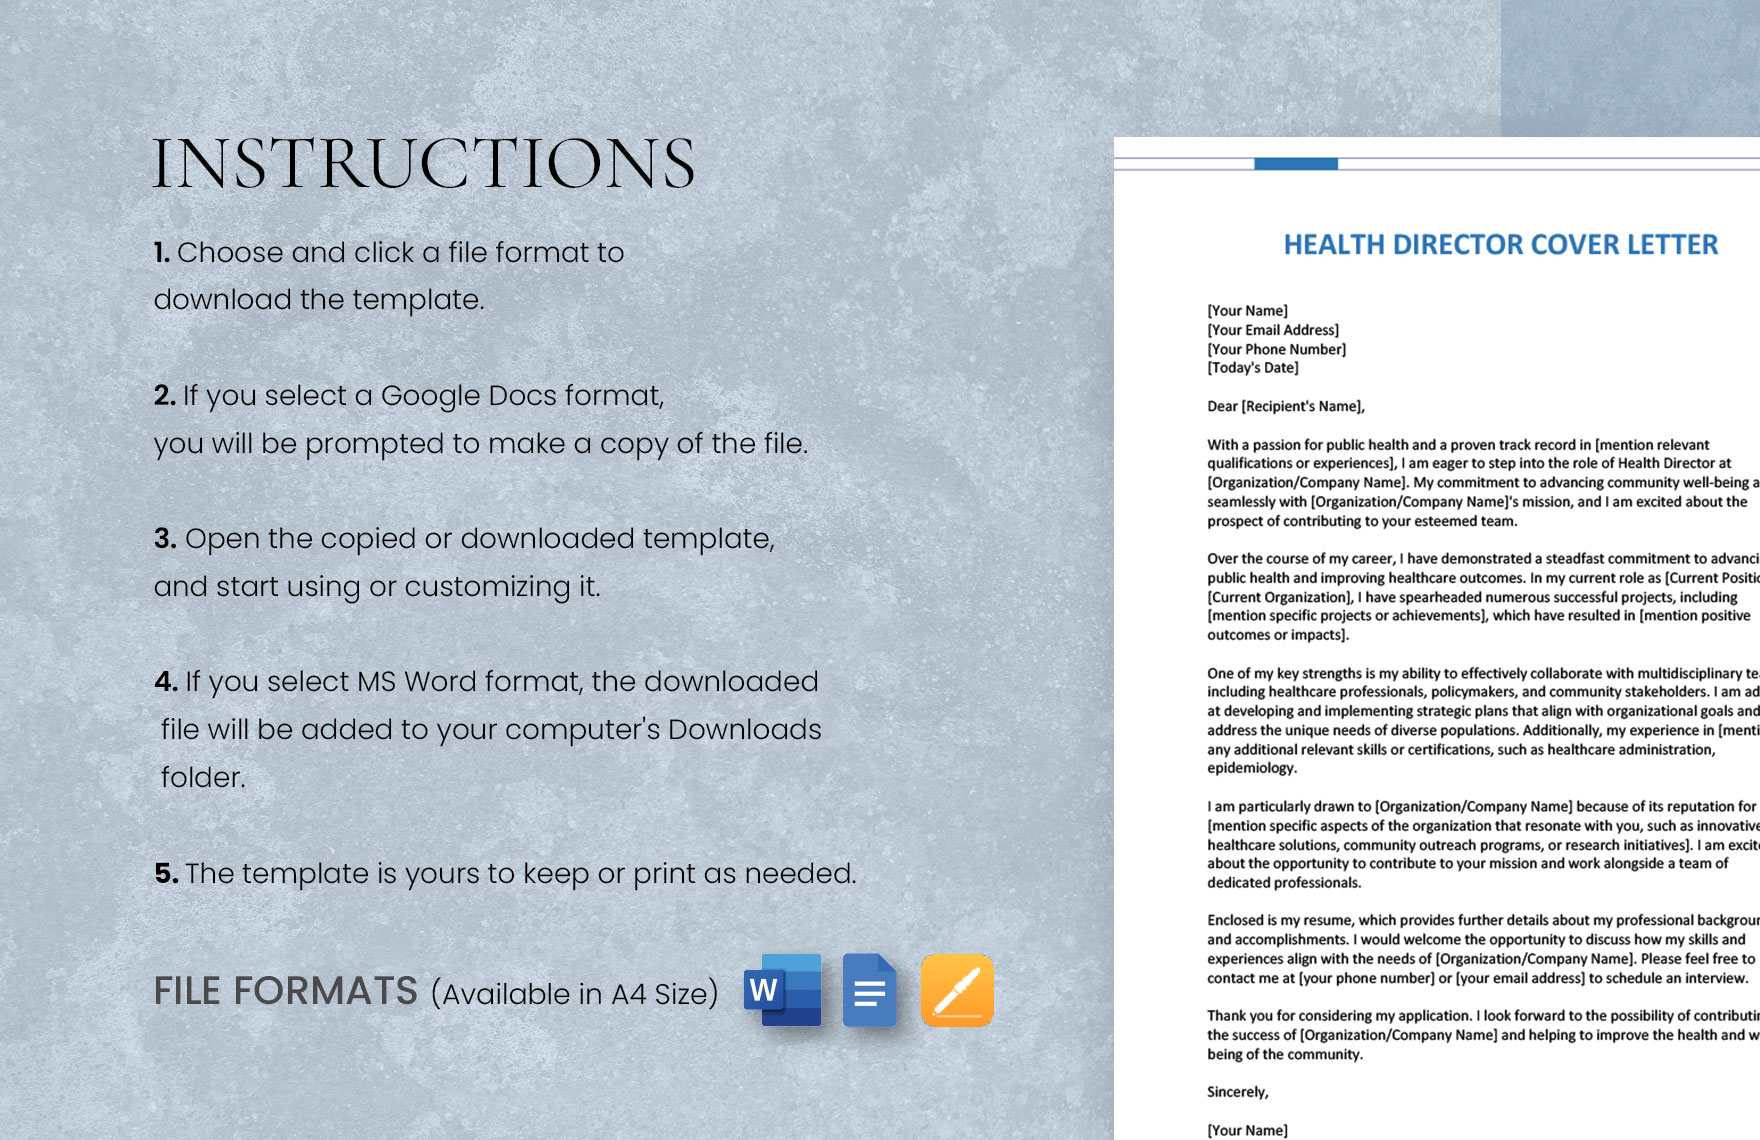 Health Director Cover Letter